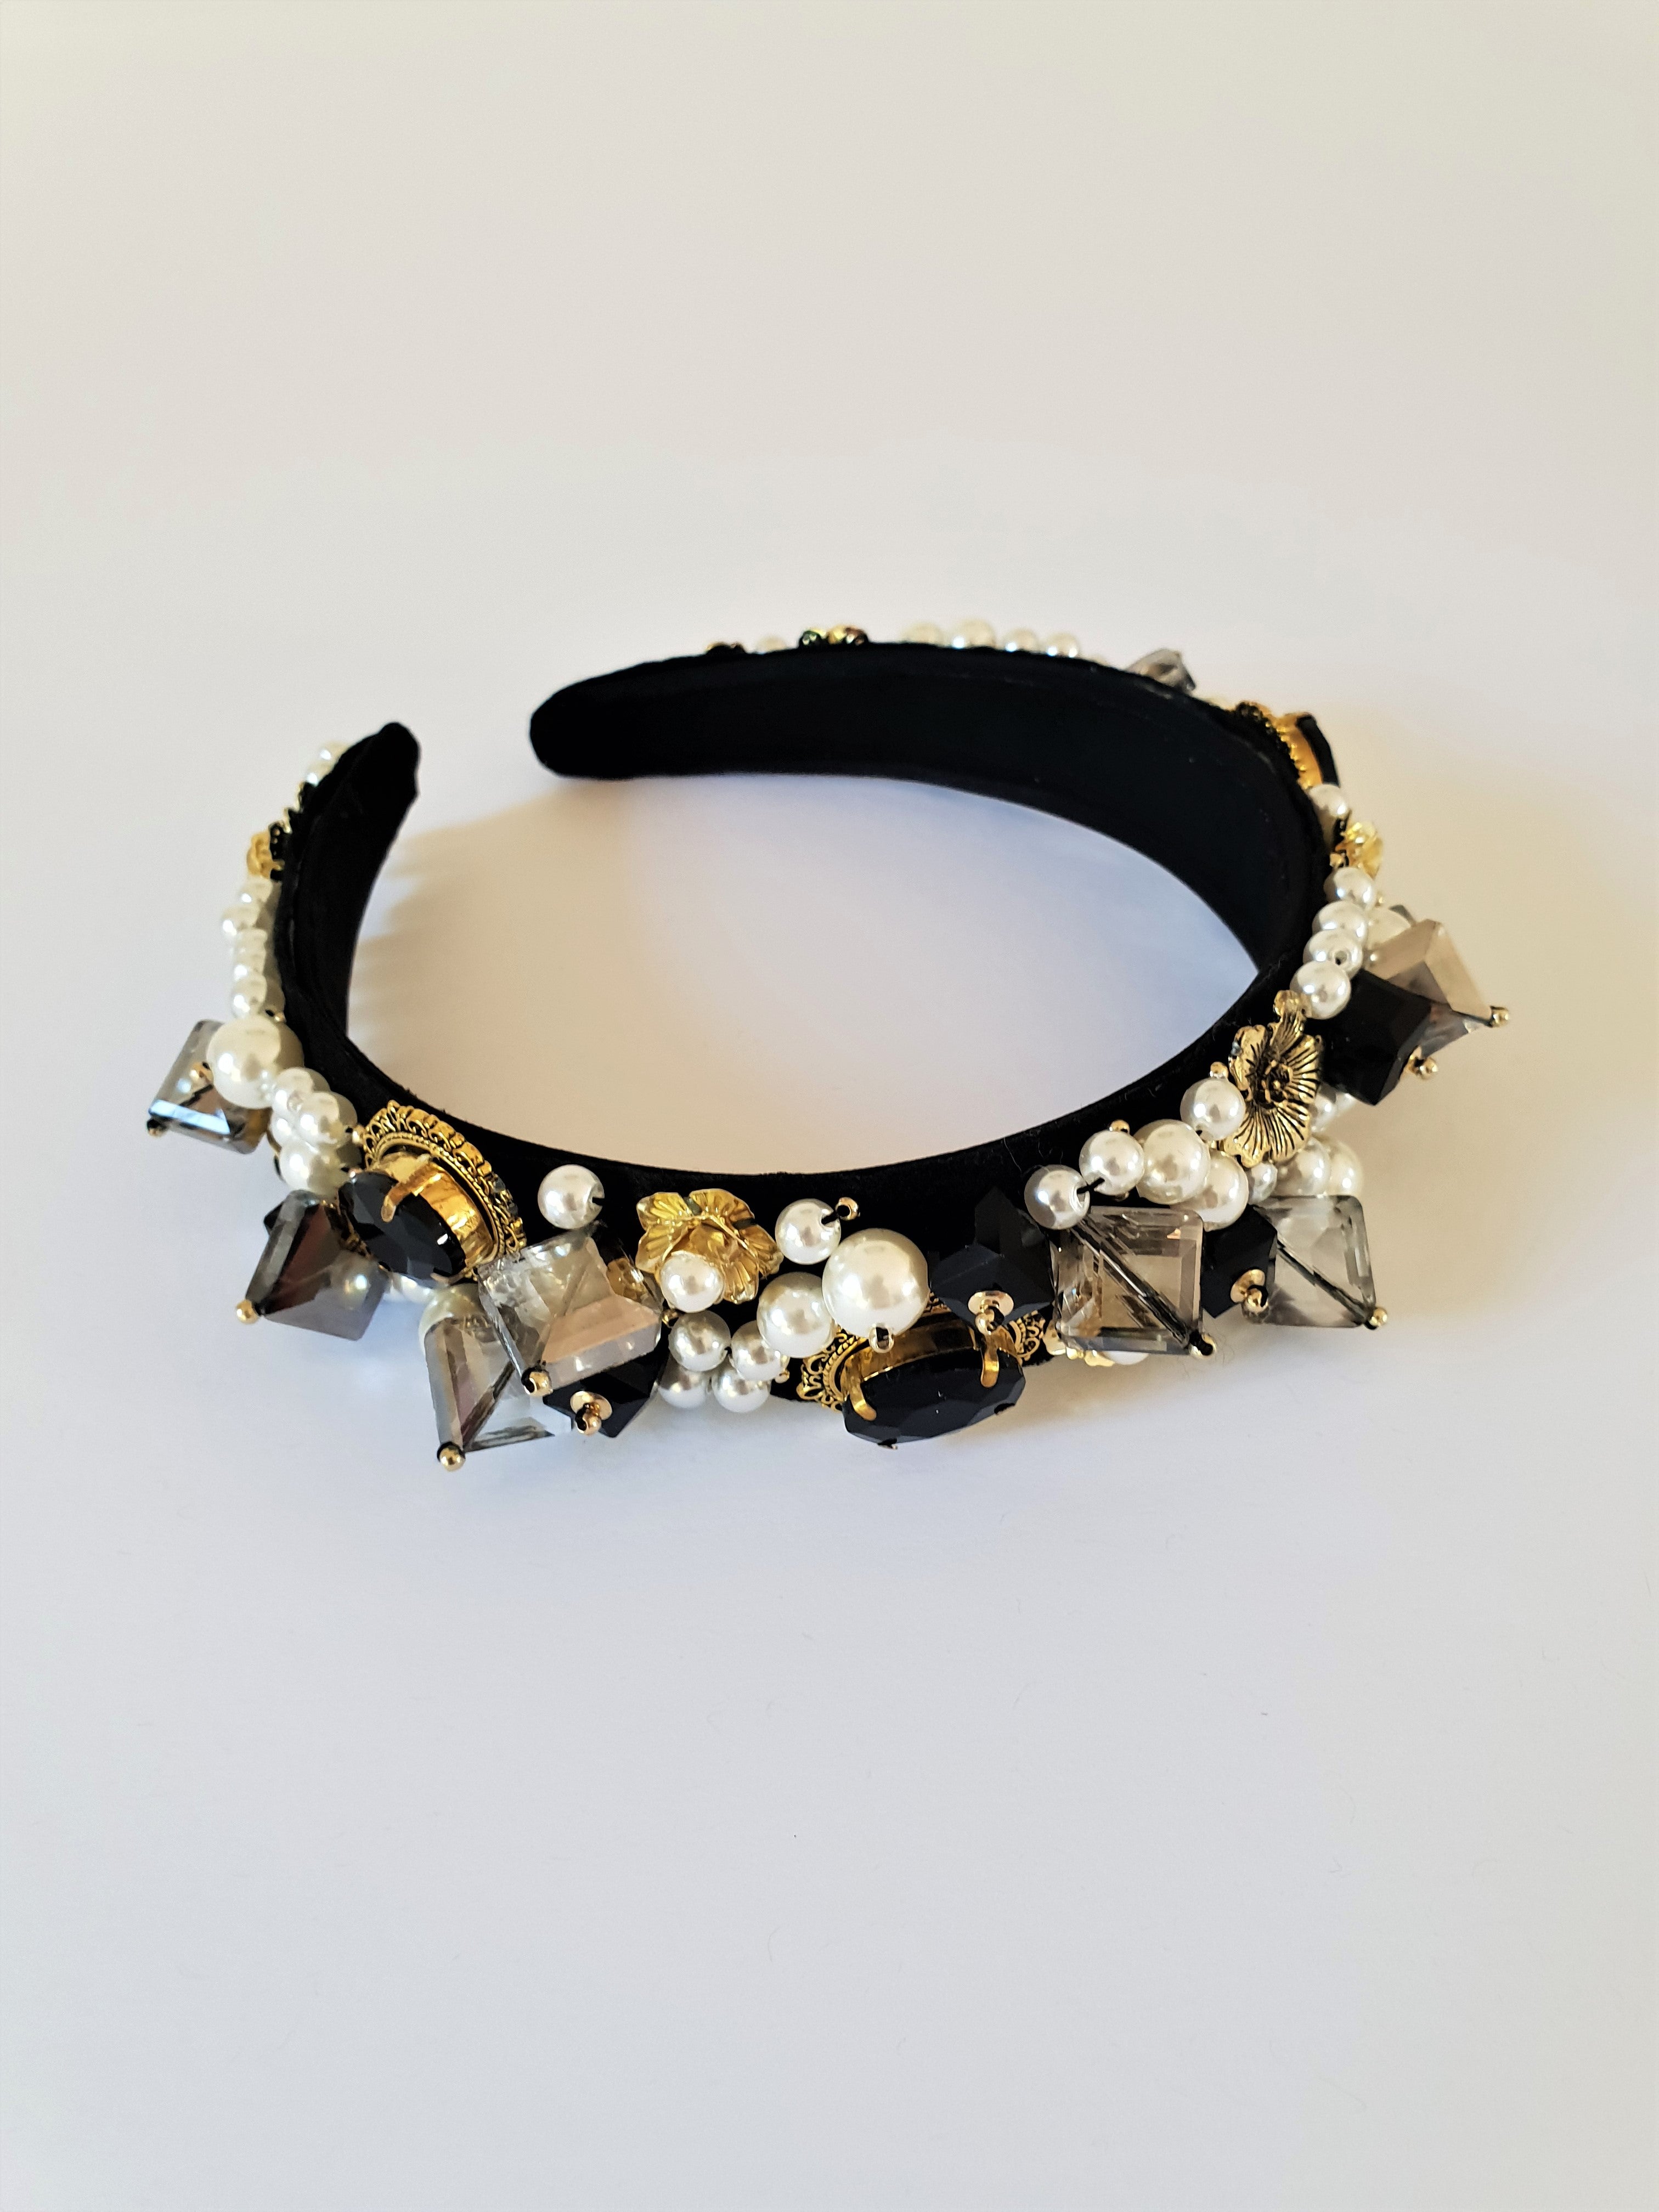 THE OTT PEARL AND STONE ENCRUSTED BANDS